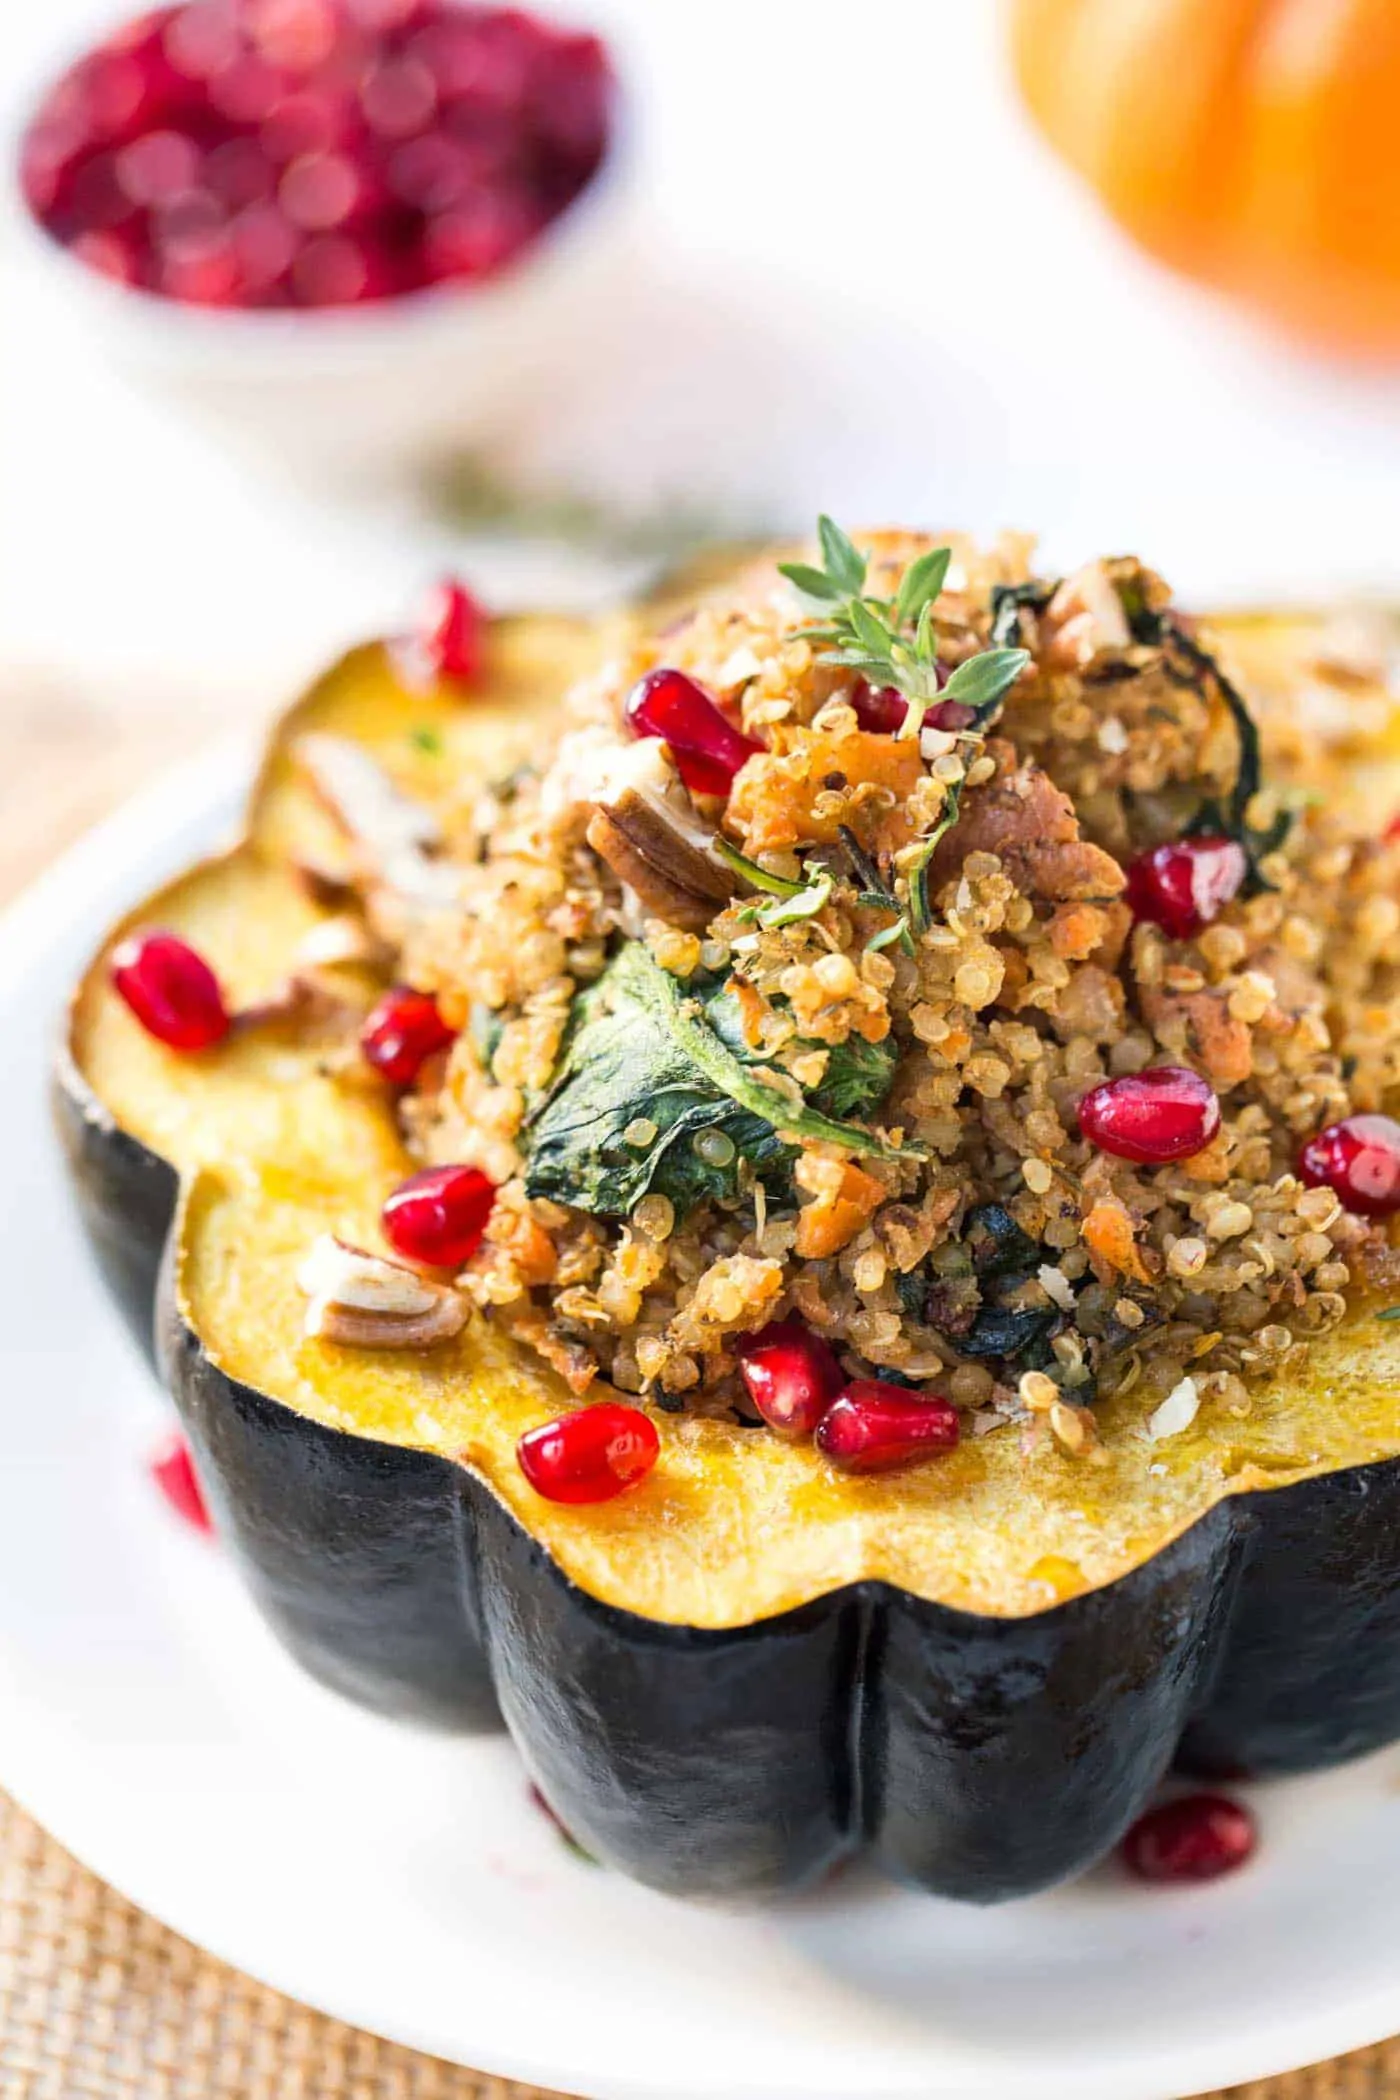 Mushroom and quinoa stuffed acorn squash on a white plate topped with pomegranate seeds.